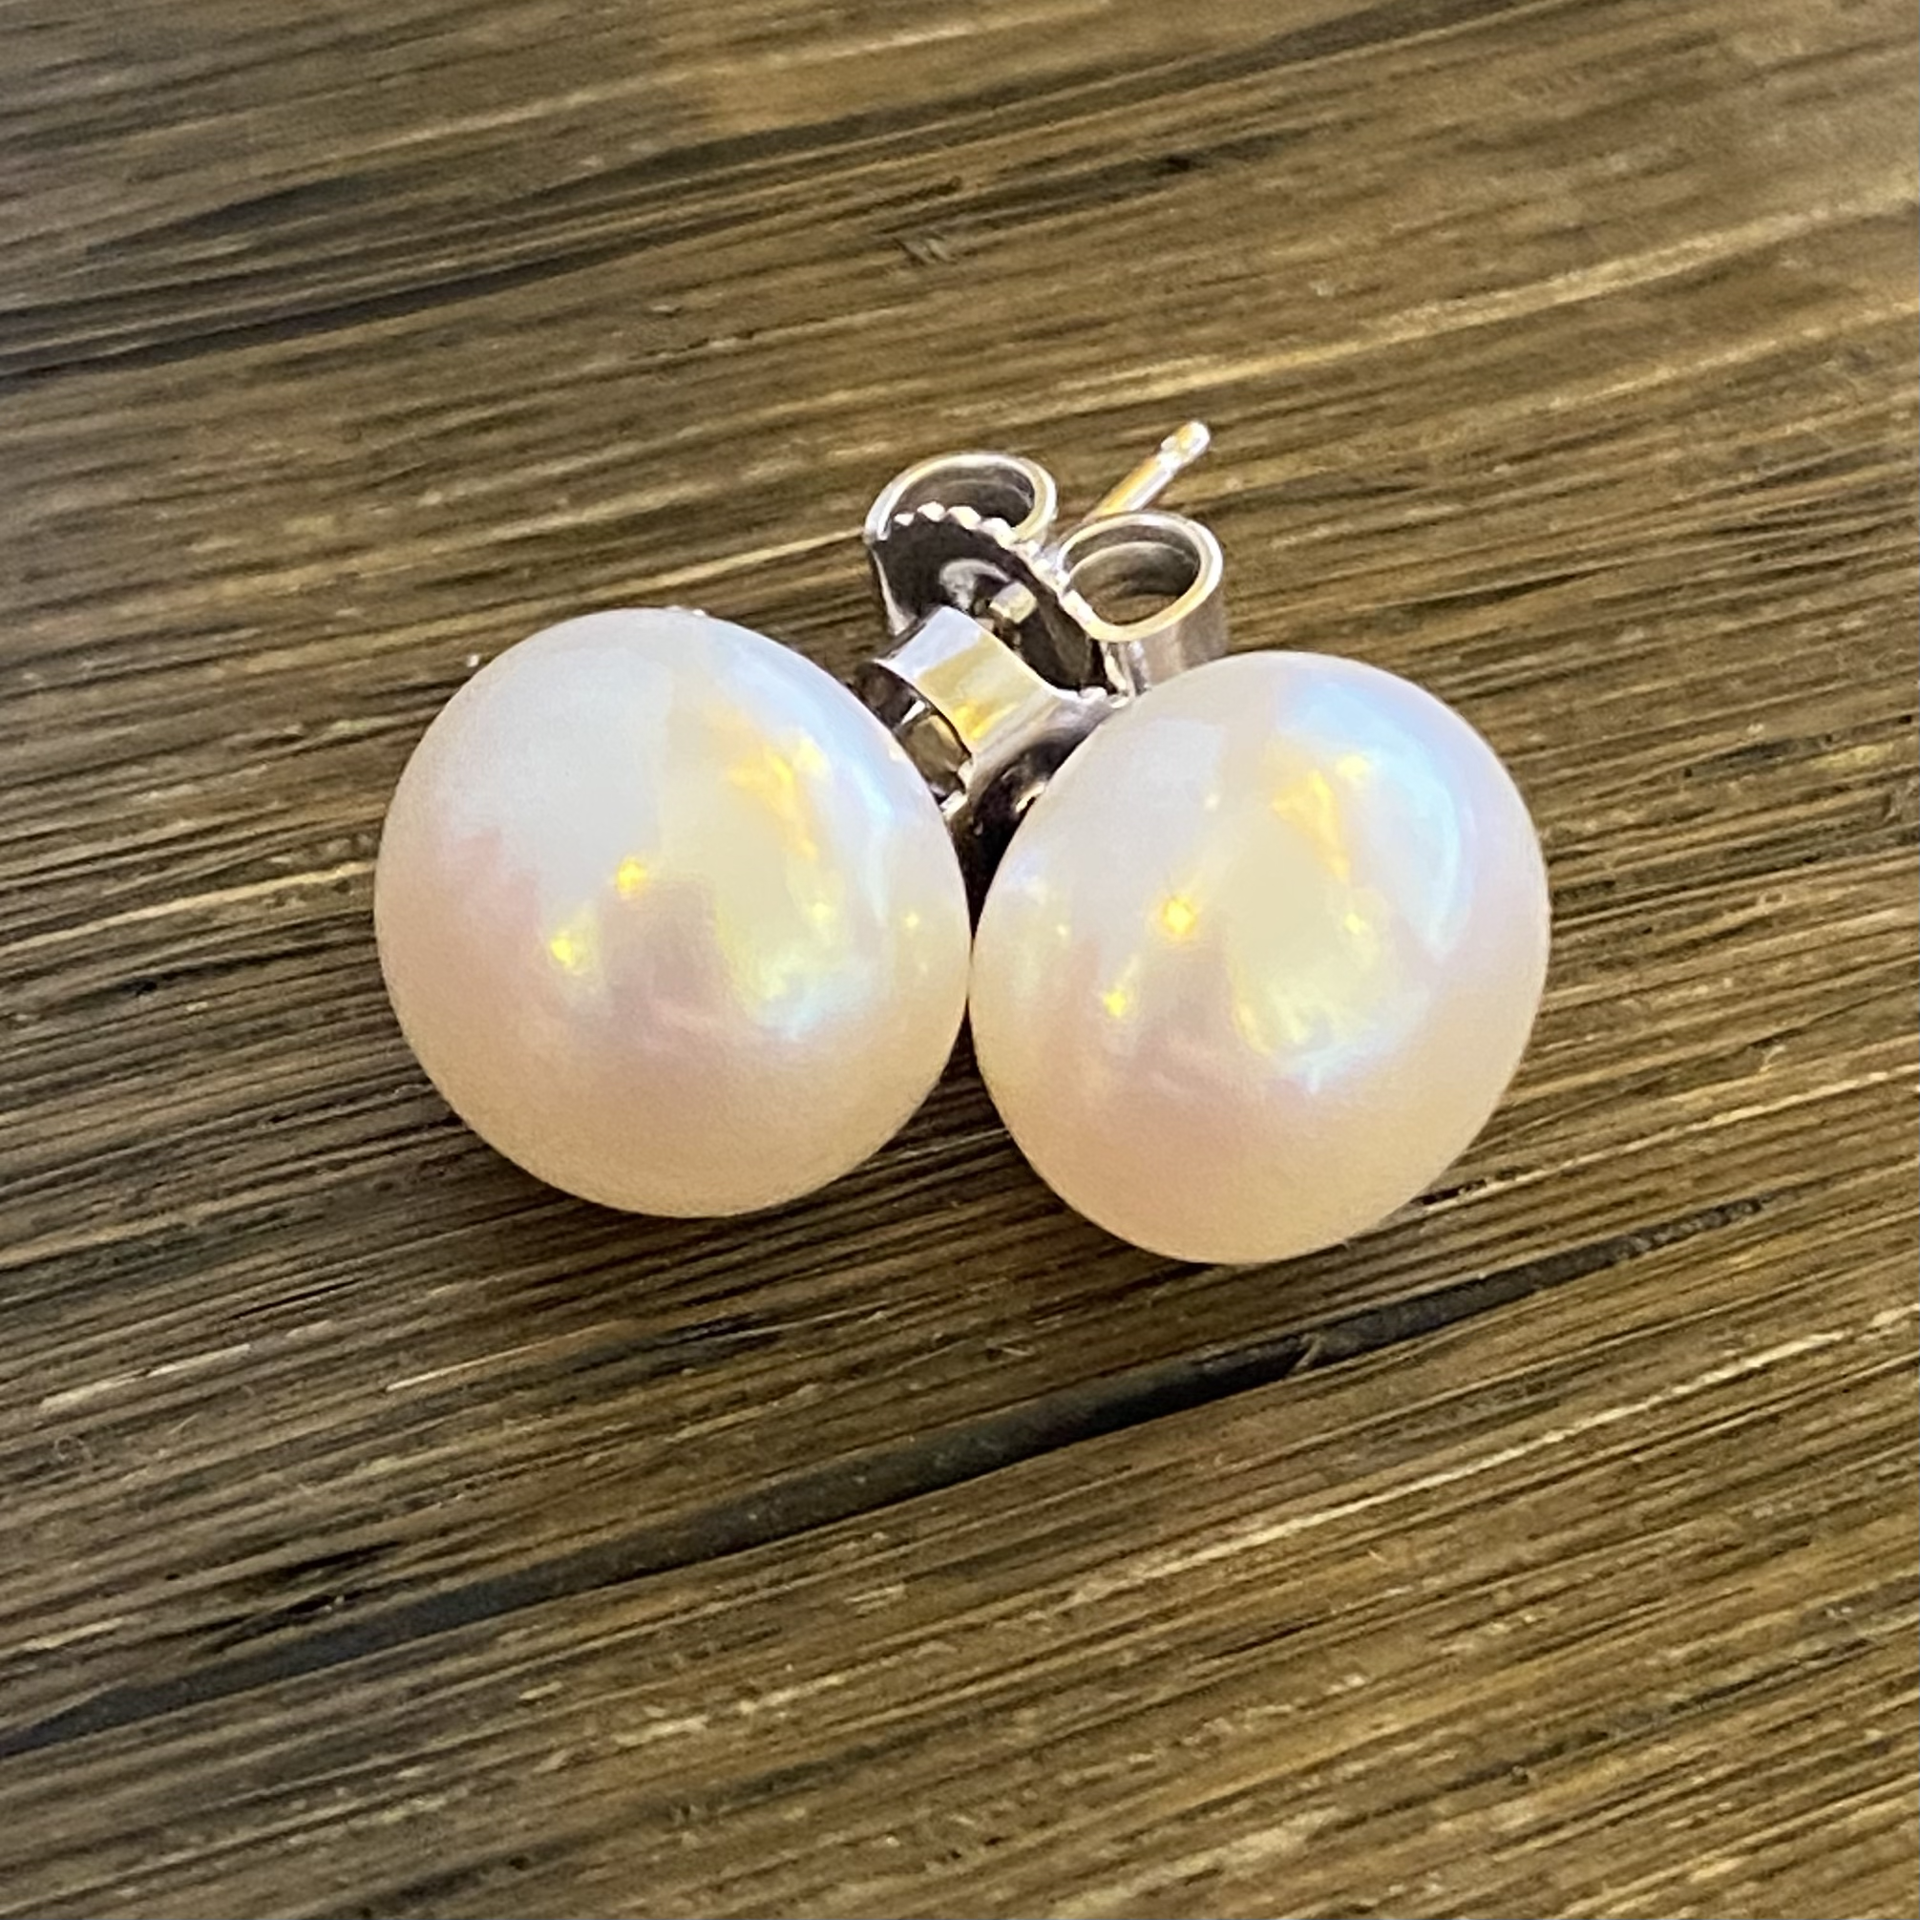 White Pearl Button Earrings 10mm by Sidney Soriano